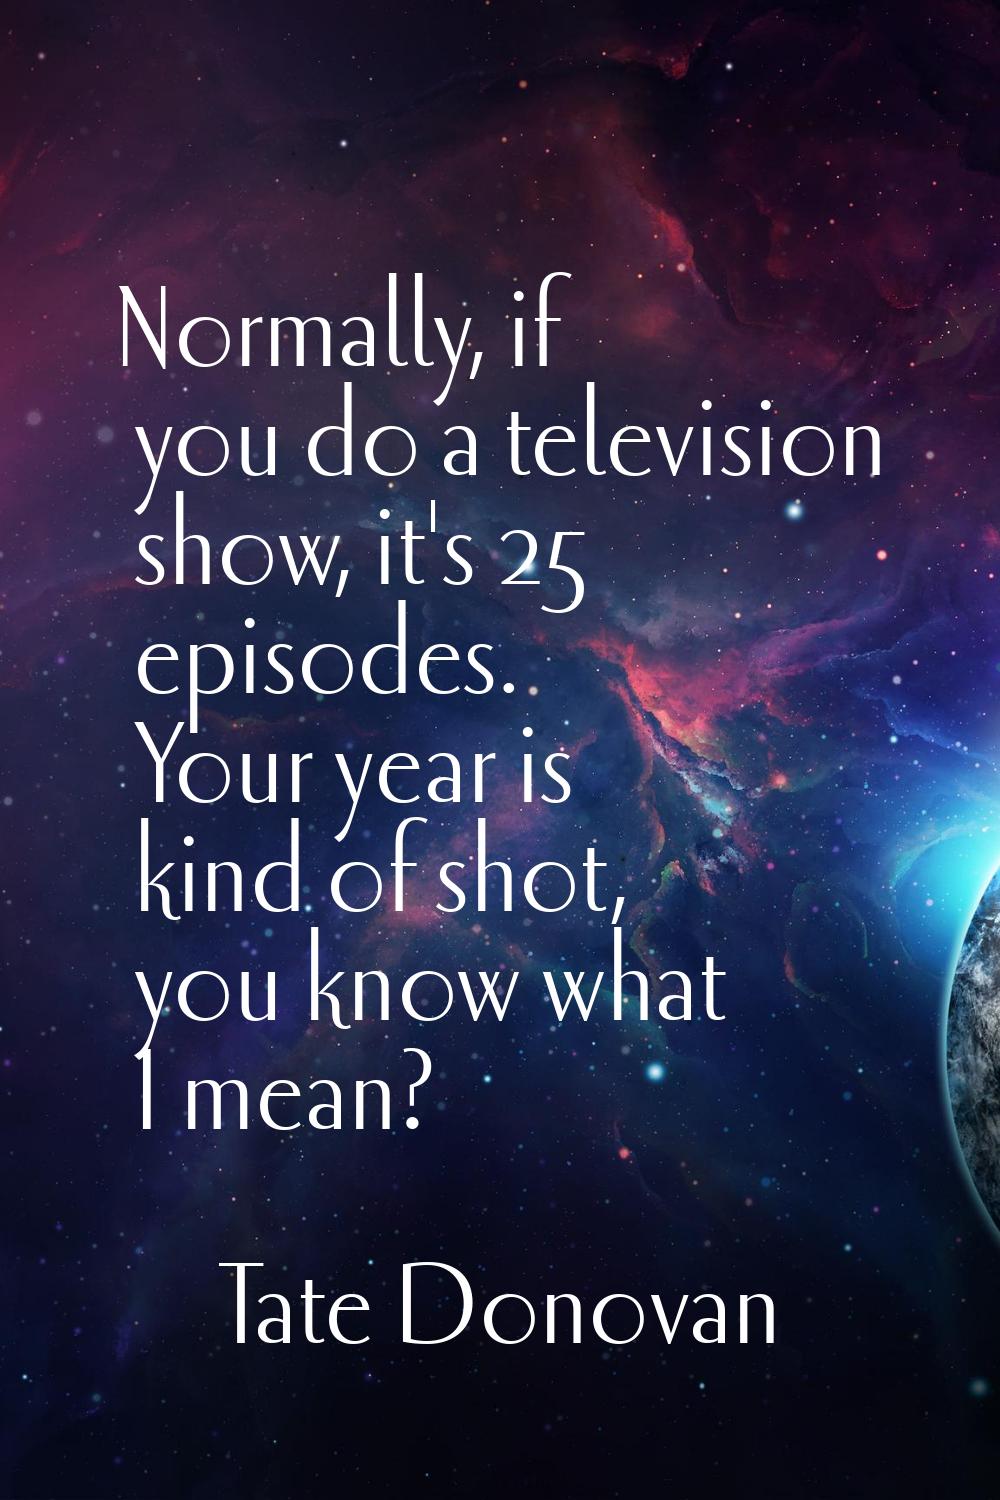 Normally, if you do a television show, it's 25 episodes. Your year is kind of shot, you know what I